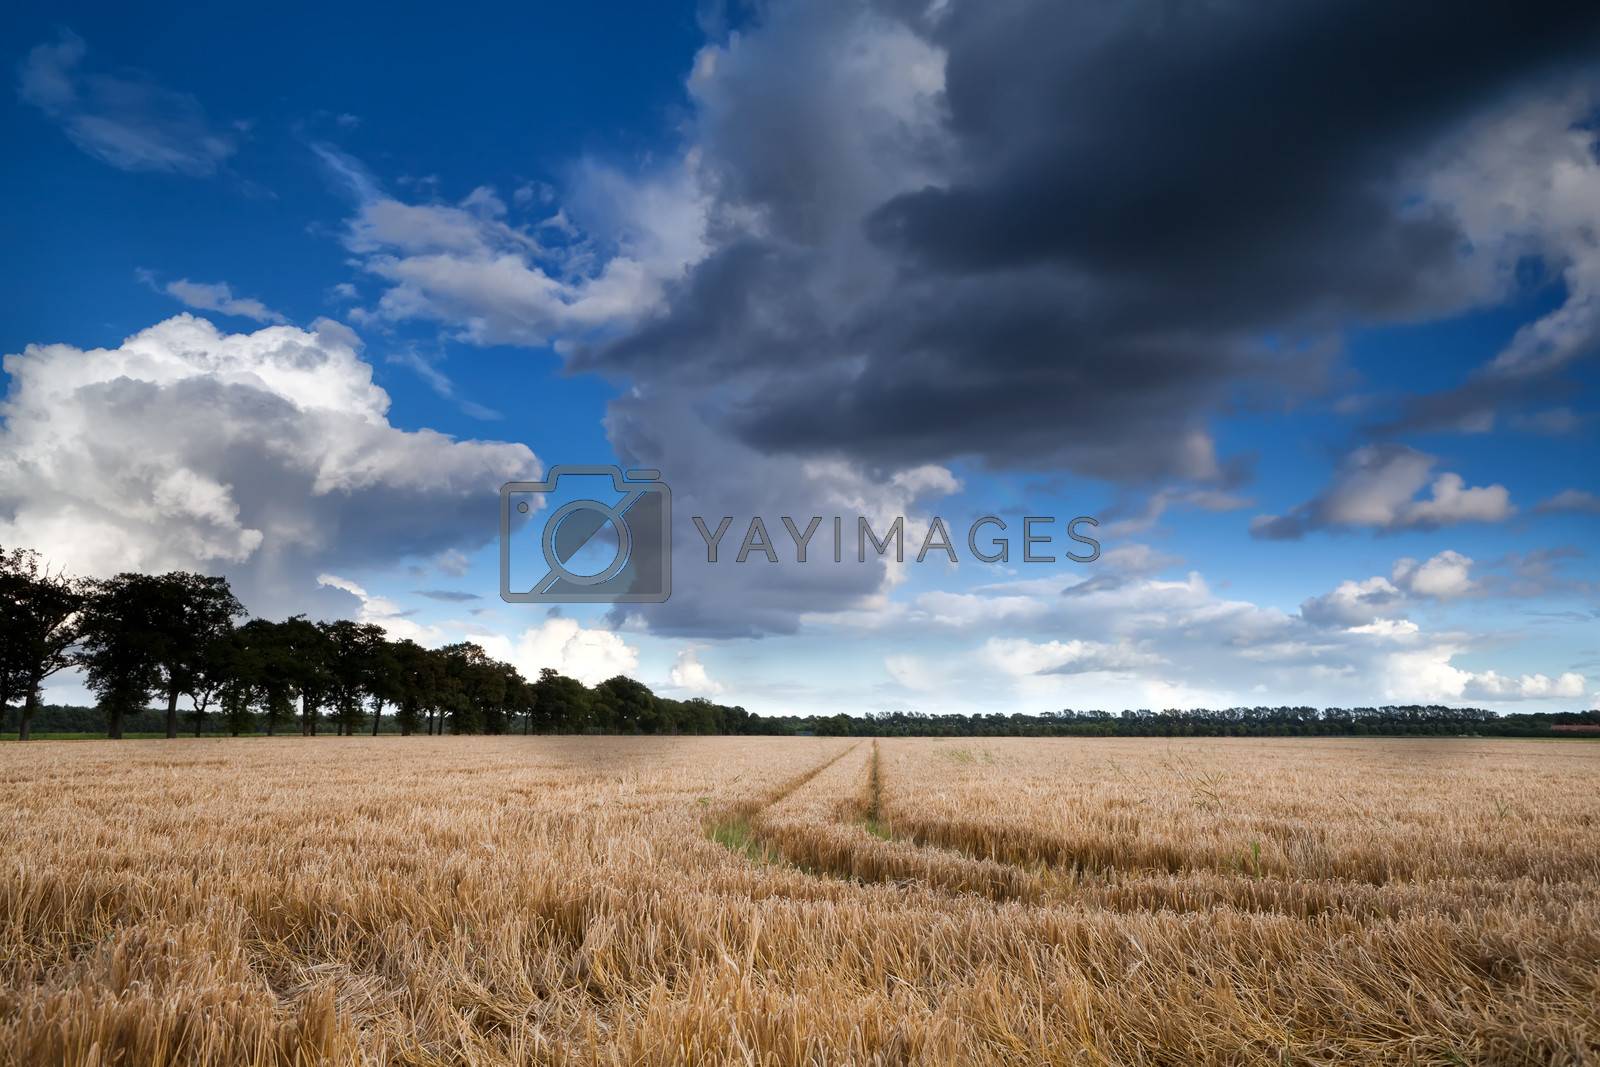 Royalty free image of wheat field and dramatic sky by catolla